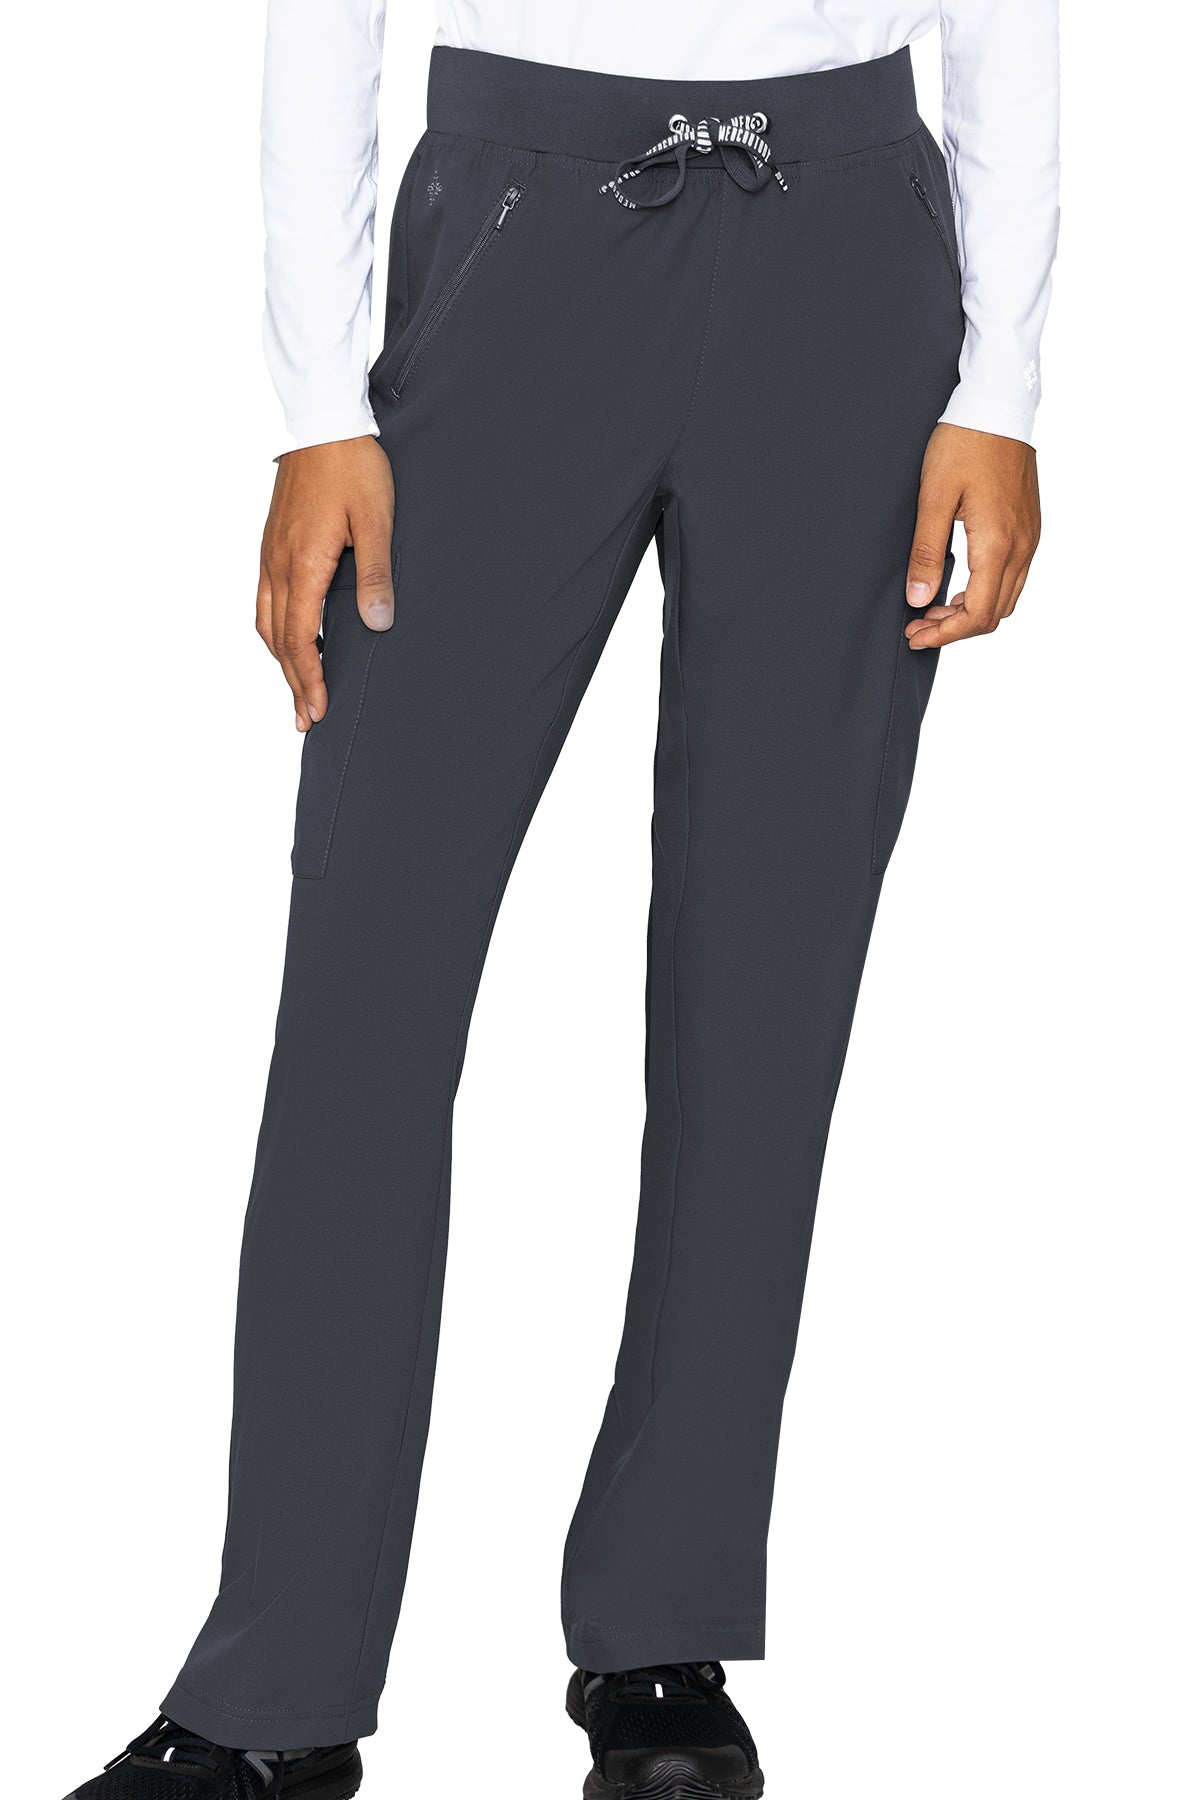 Med Couture Tall Scrub Pants Insight Zipper Pant in Pewter at Parker's Clothing and Shoes.